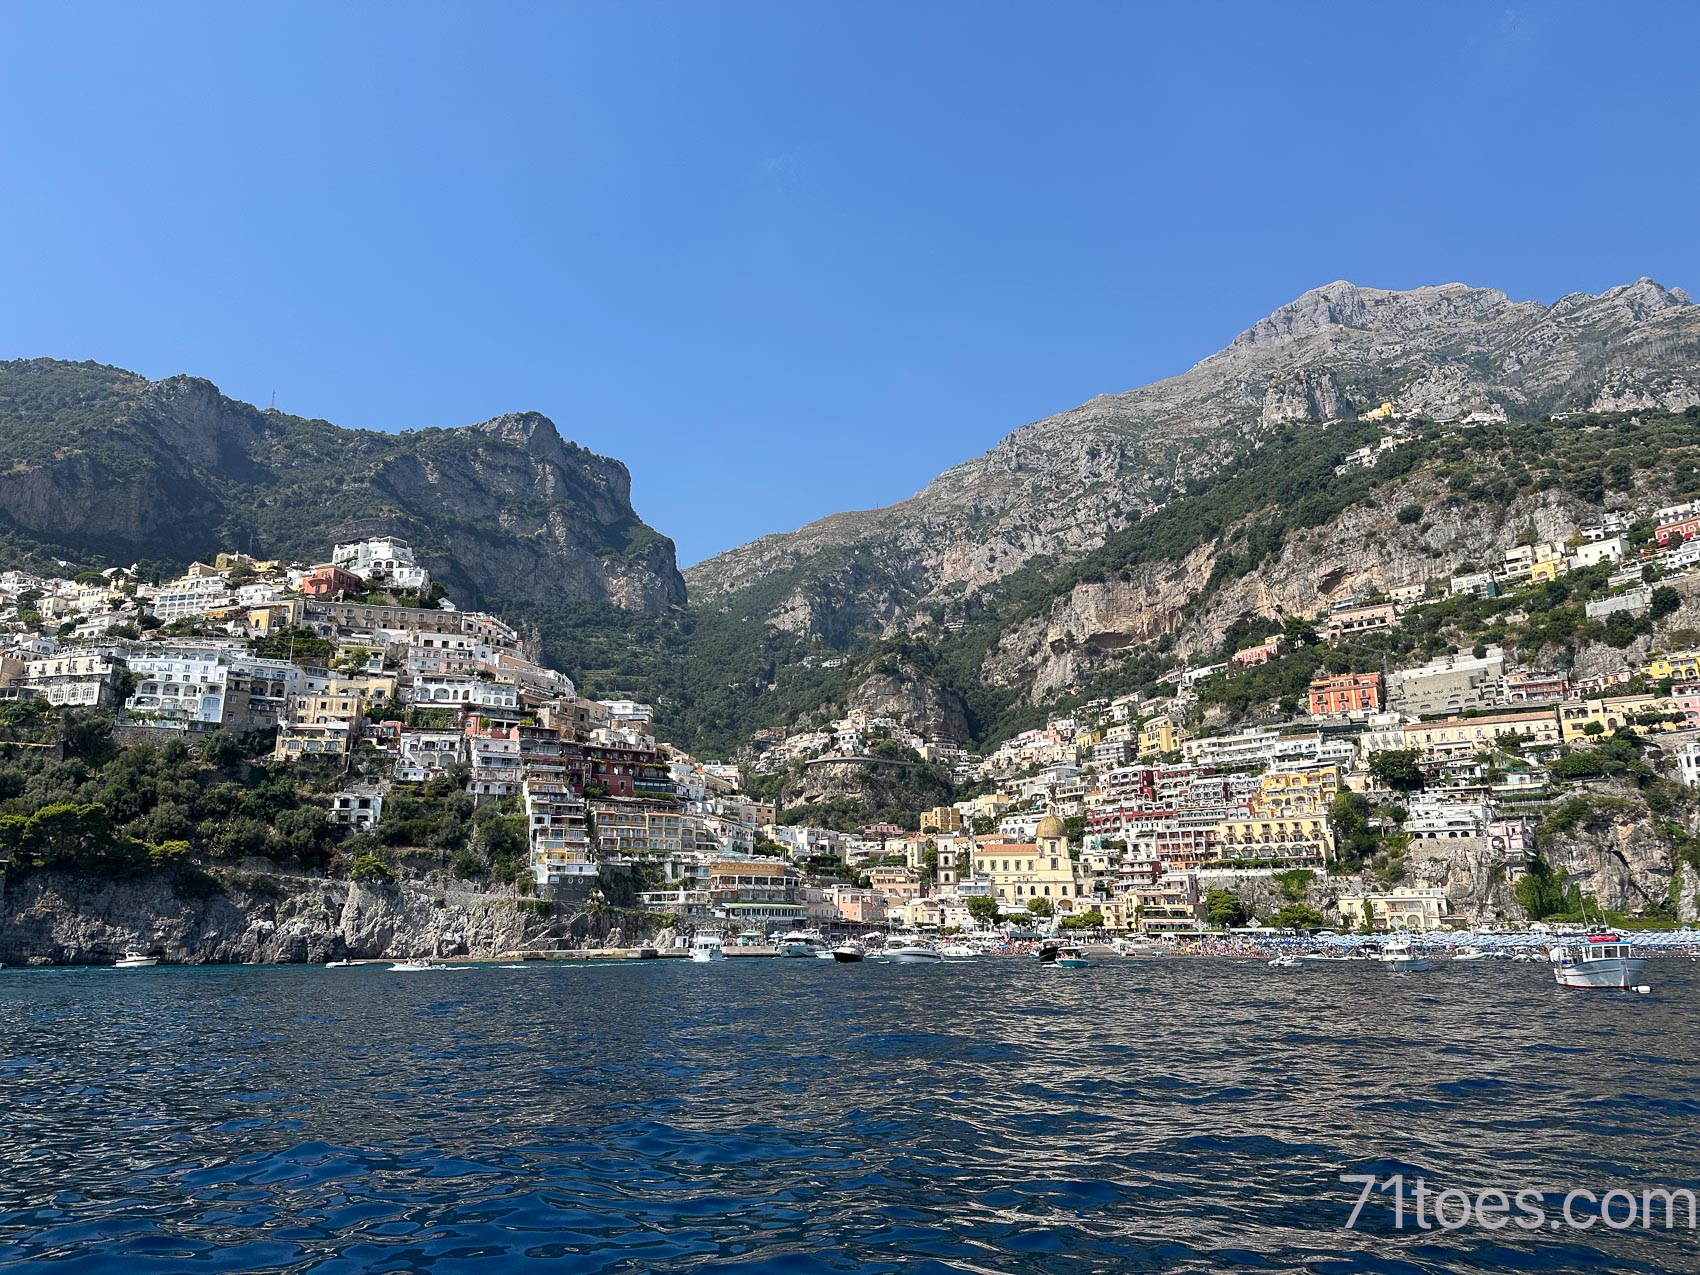 The view coming into Positano from the sea